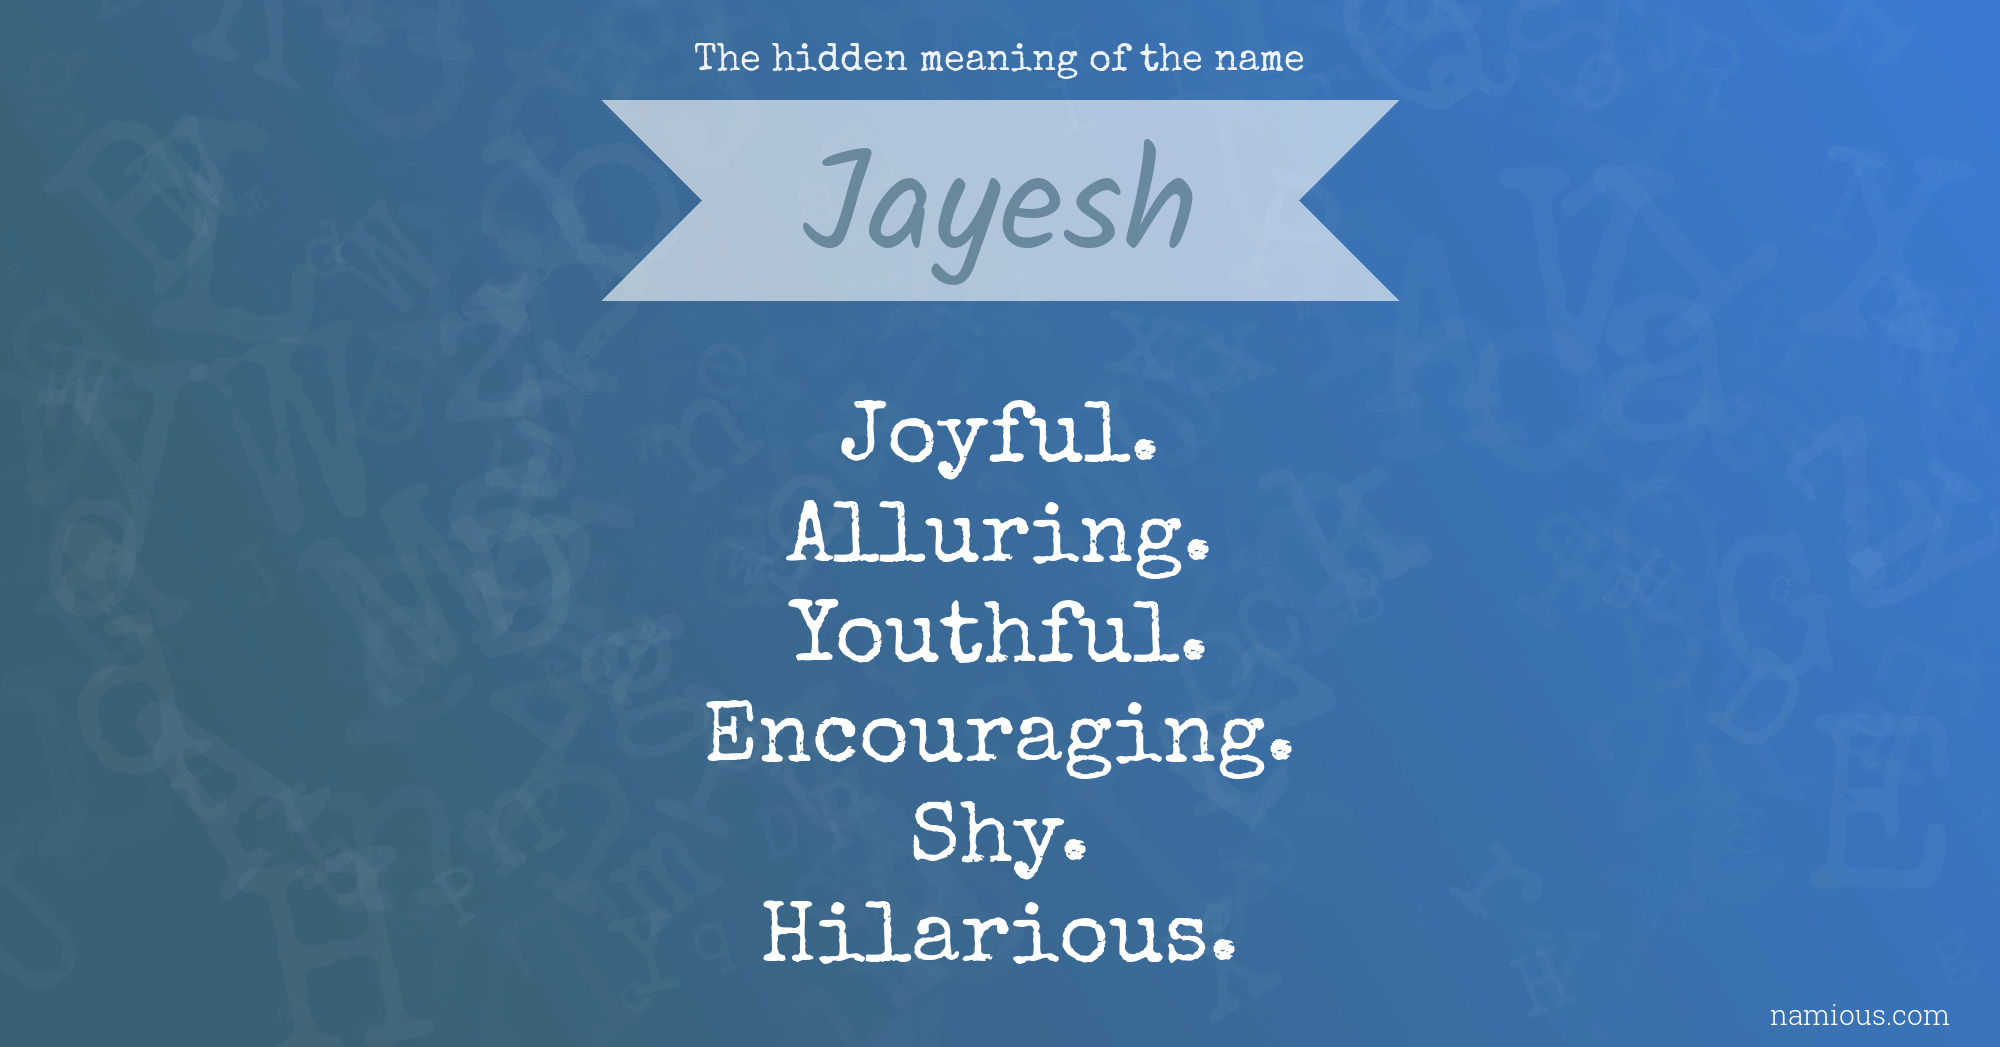 The hidden meaning of the name Jayesh